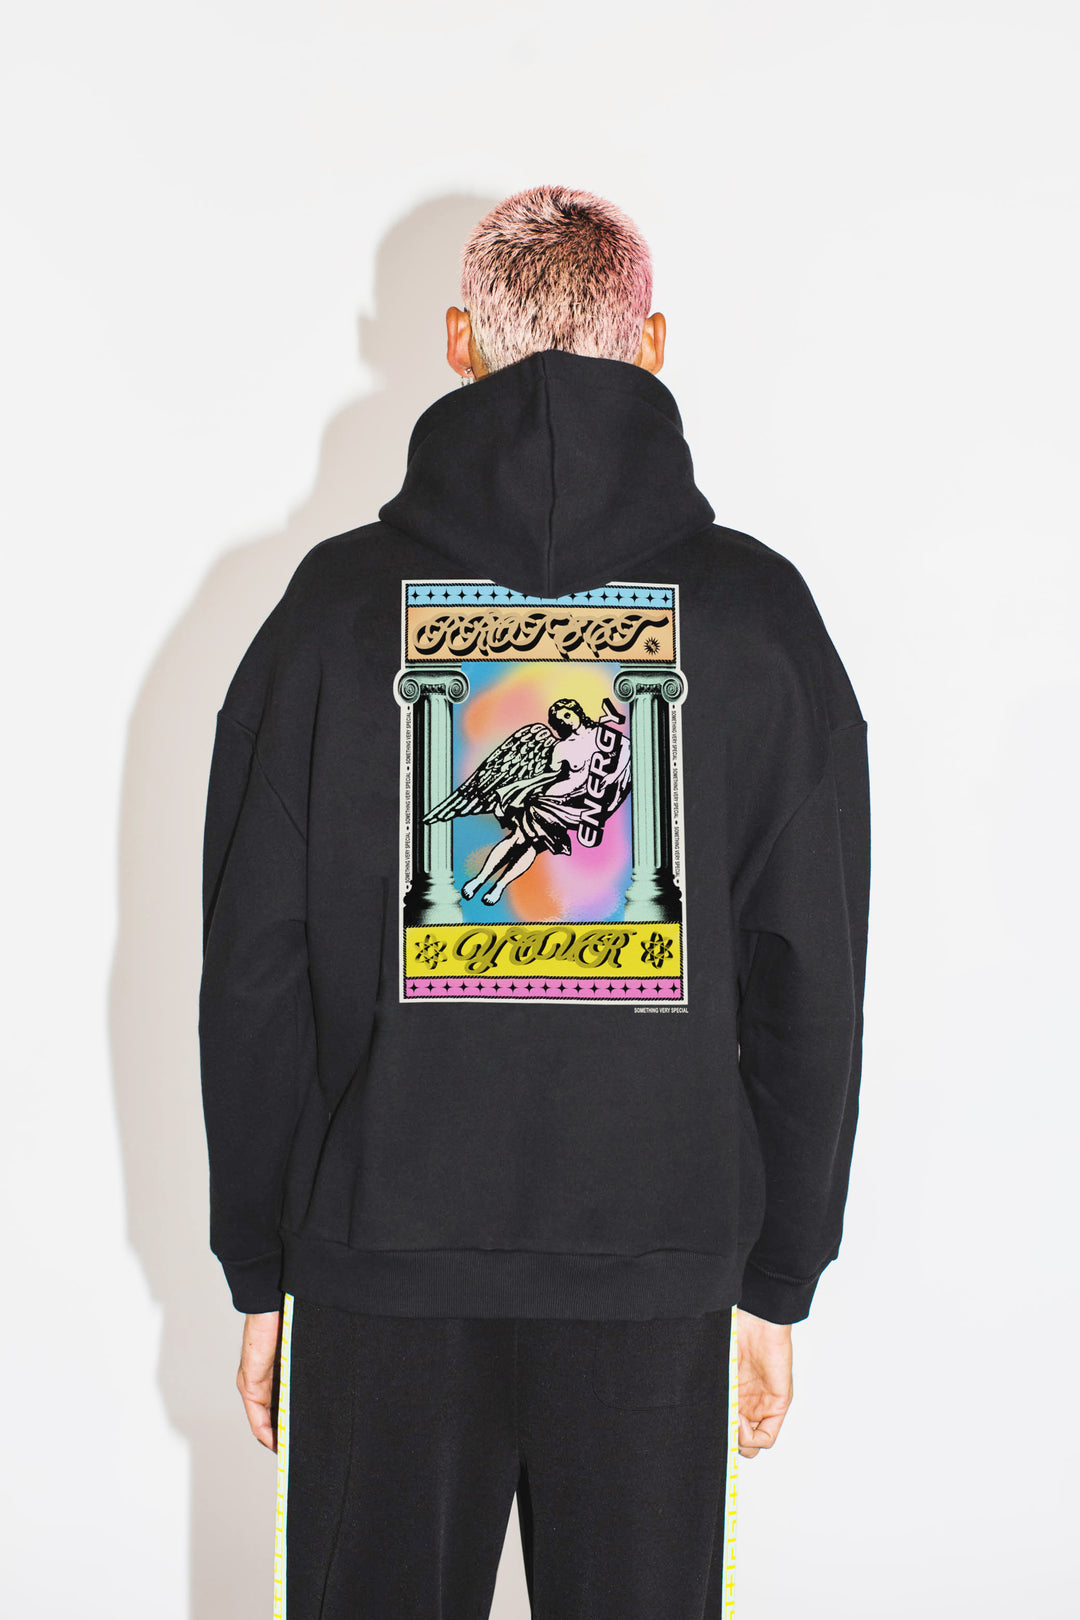 Something Very Special - Protect Your Energy - Poster Hoody